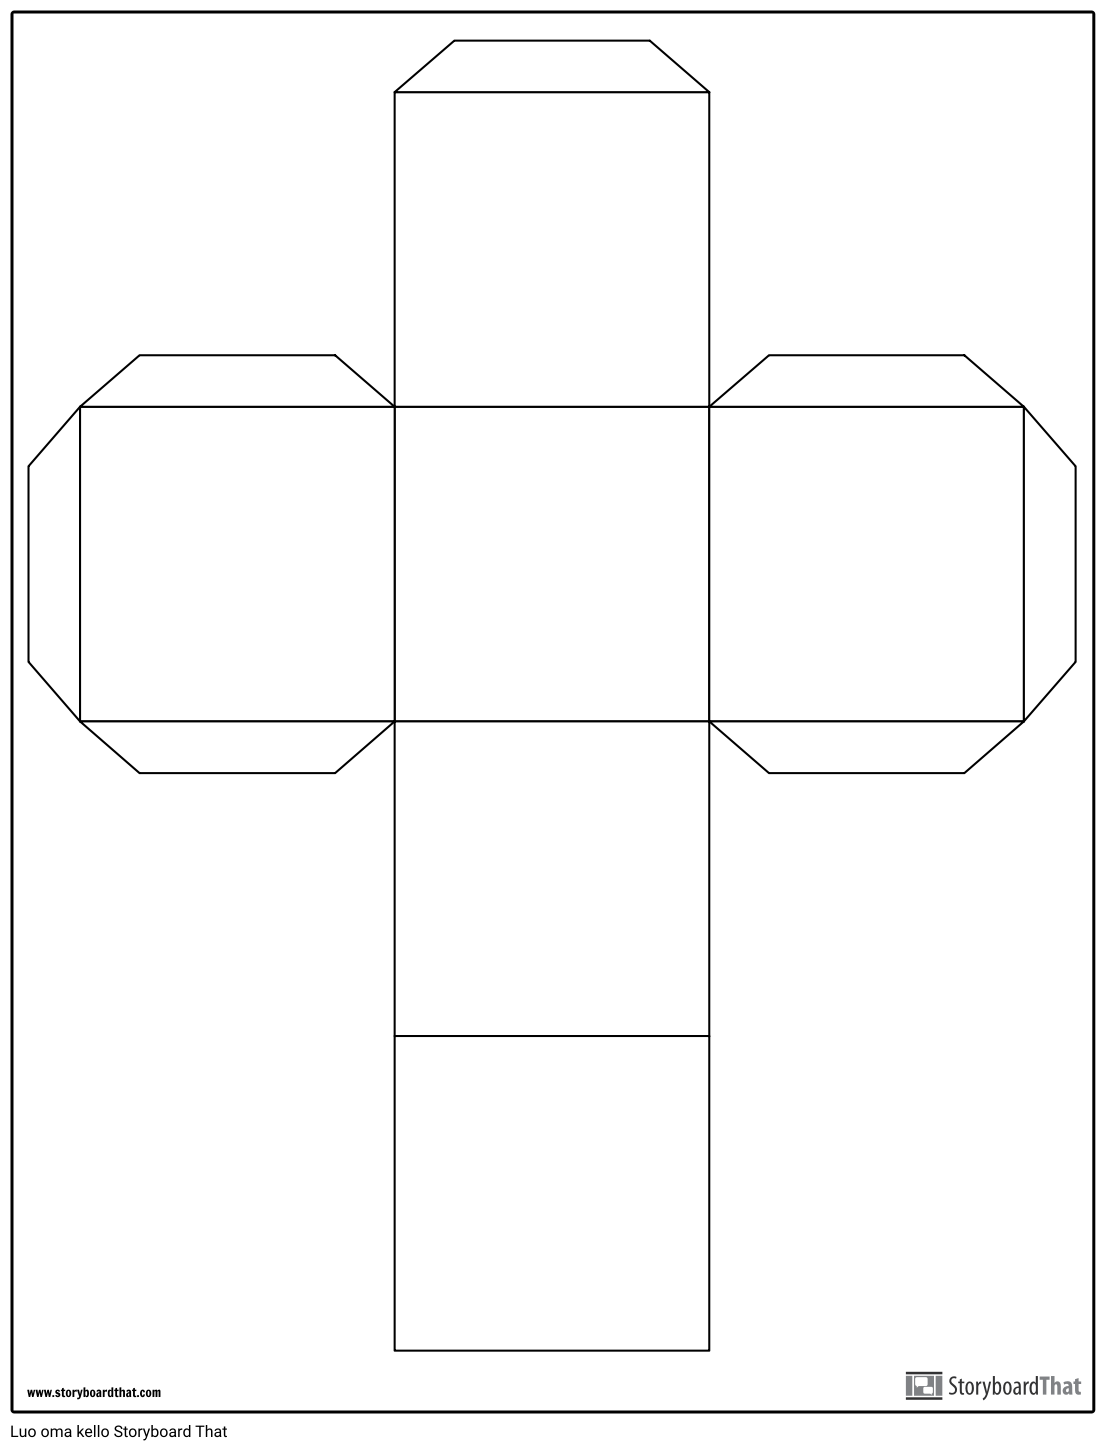 cube-template-mont-as-p-c-fi-examples